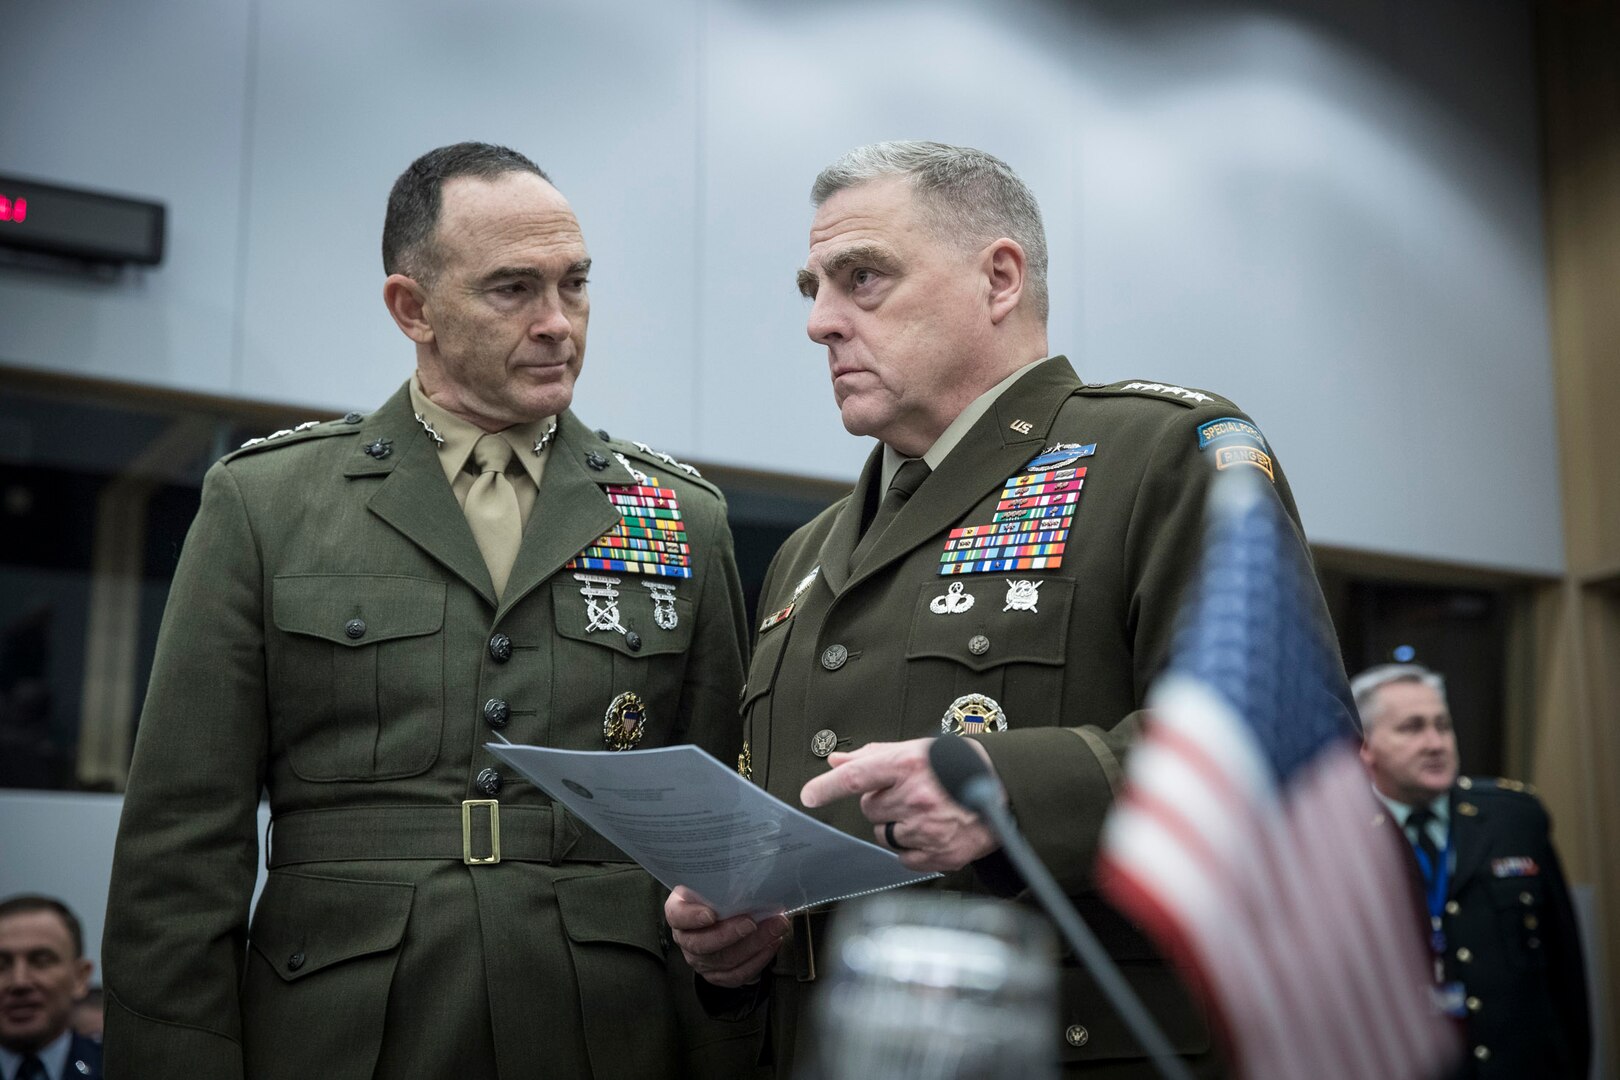 Two military officers speak to each other.